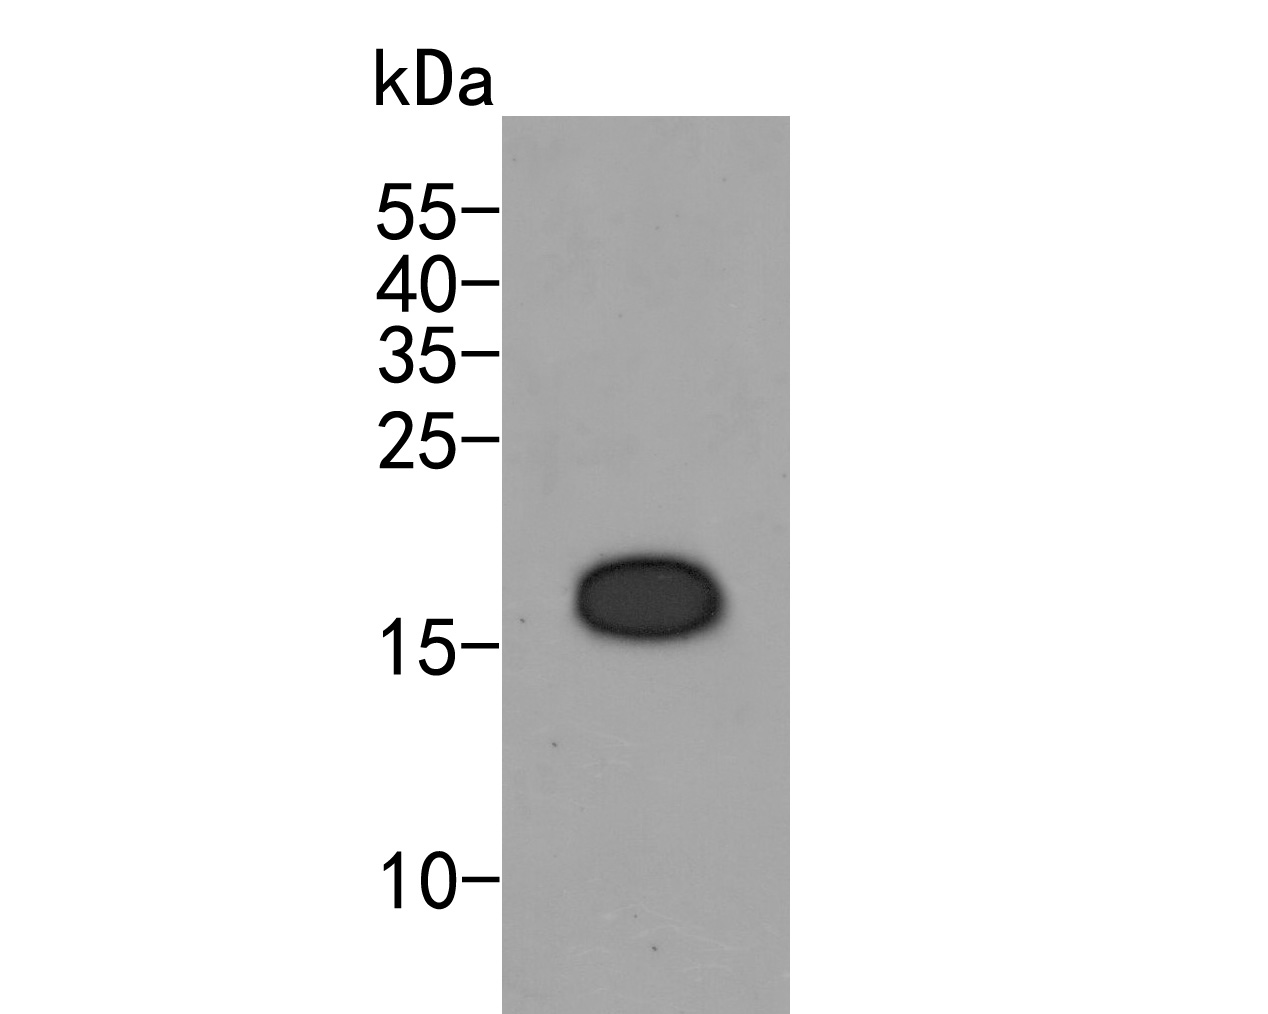 Western blot analysis of hNaa50p on K562 cell lysates. Proteins were transferred to a PVDF membrane and blocked with 5% BSA in PBS for 1 hour at room temperature. The primary antibody (HA500001, 1/500) was used in 5% BSA at room temperature for 2 hours. Goat Anti-Rabbit IgG - HRP Secondary Antibody (HA1001) at 1:5,000 dilution was used for 1 hour at room temperature.